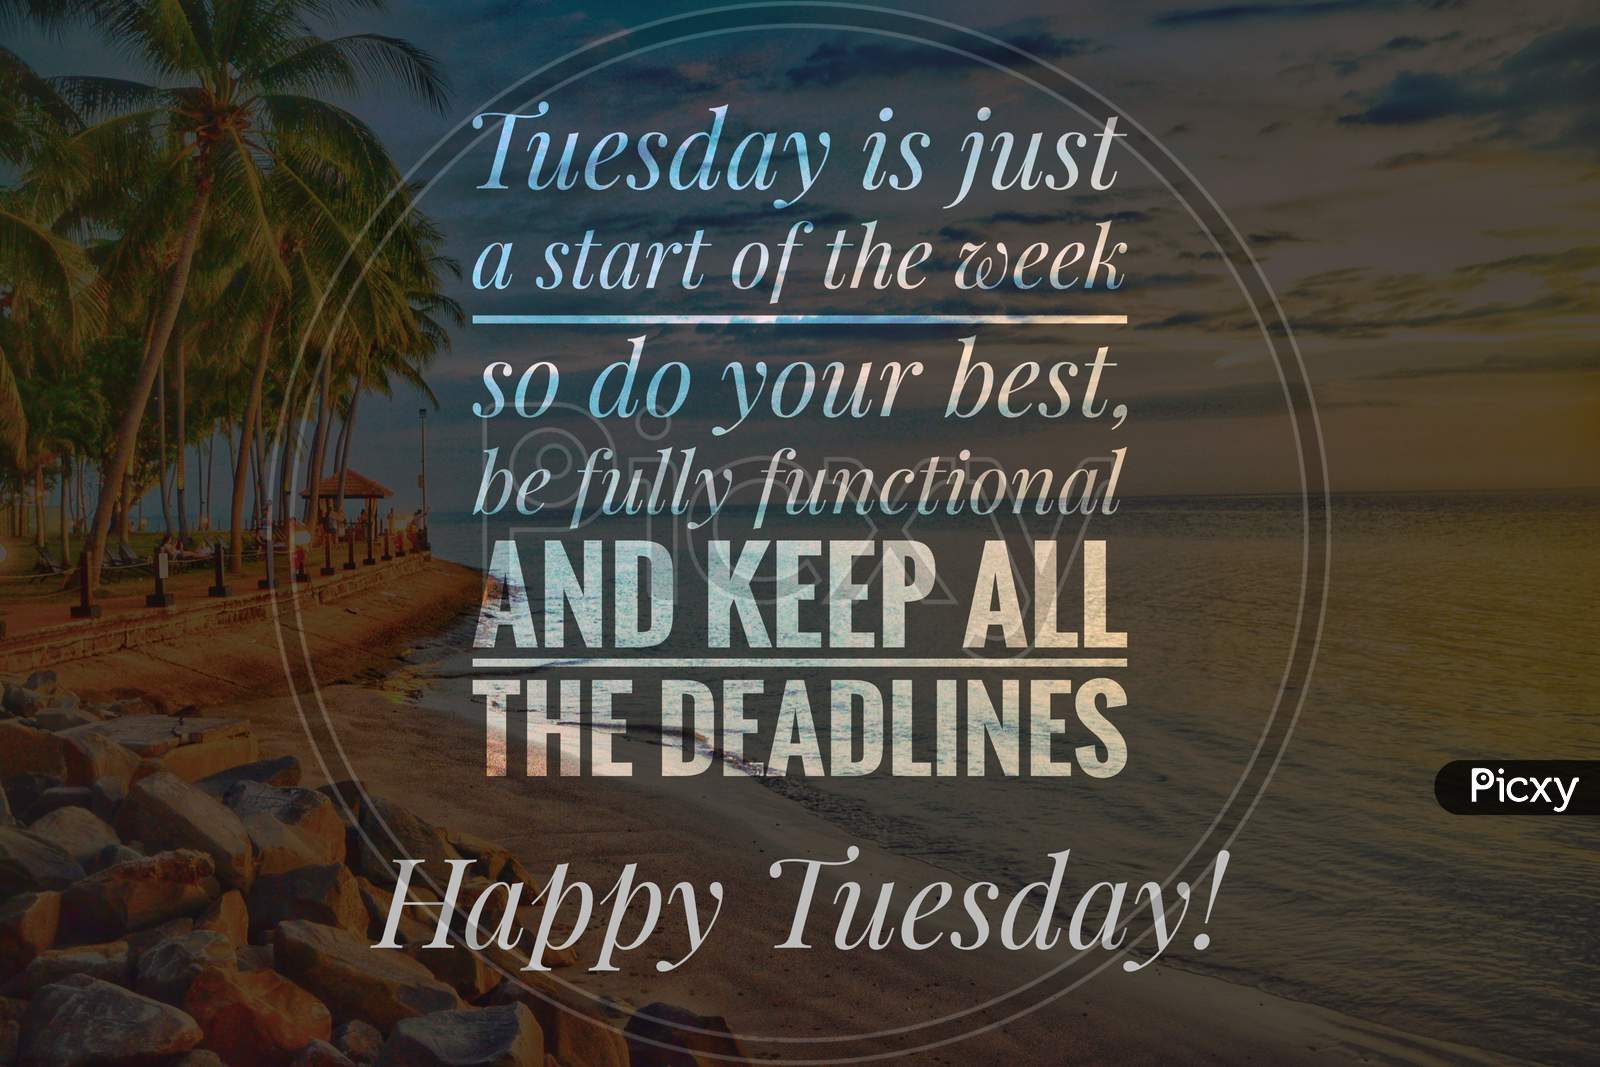 Image with wordings or quotes for happy Tuesday